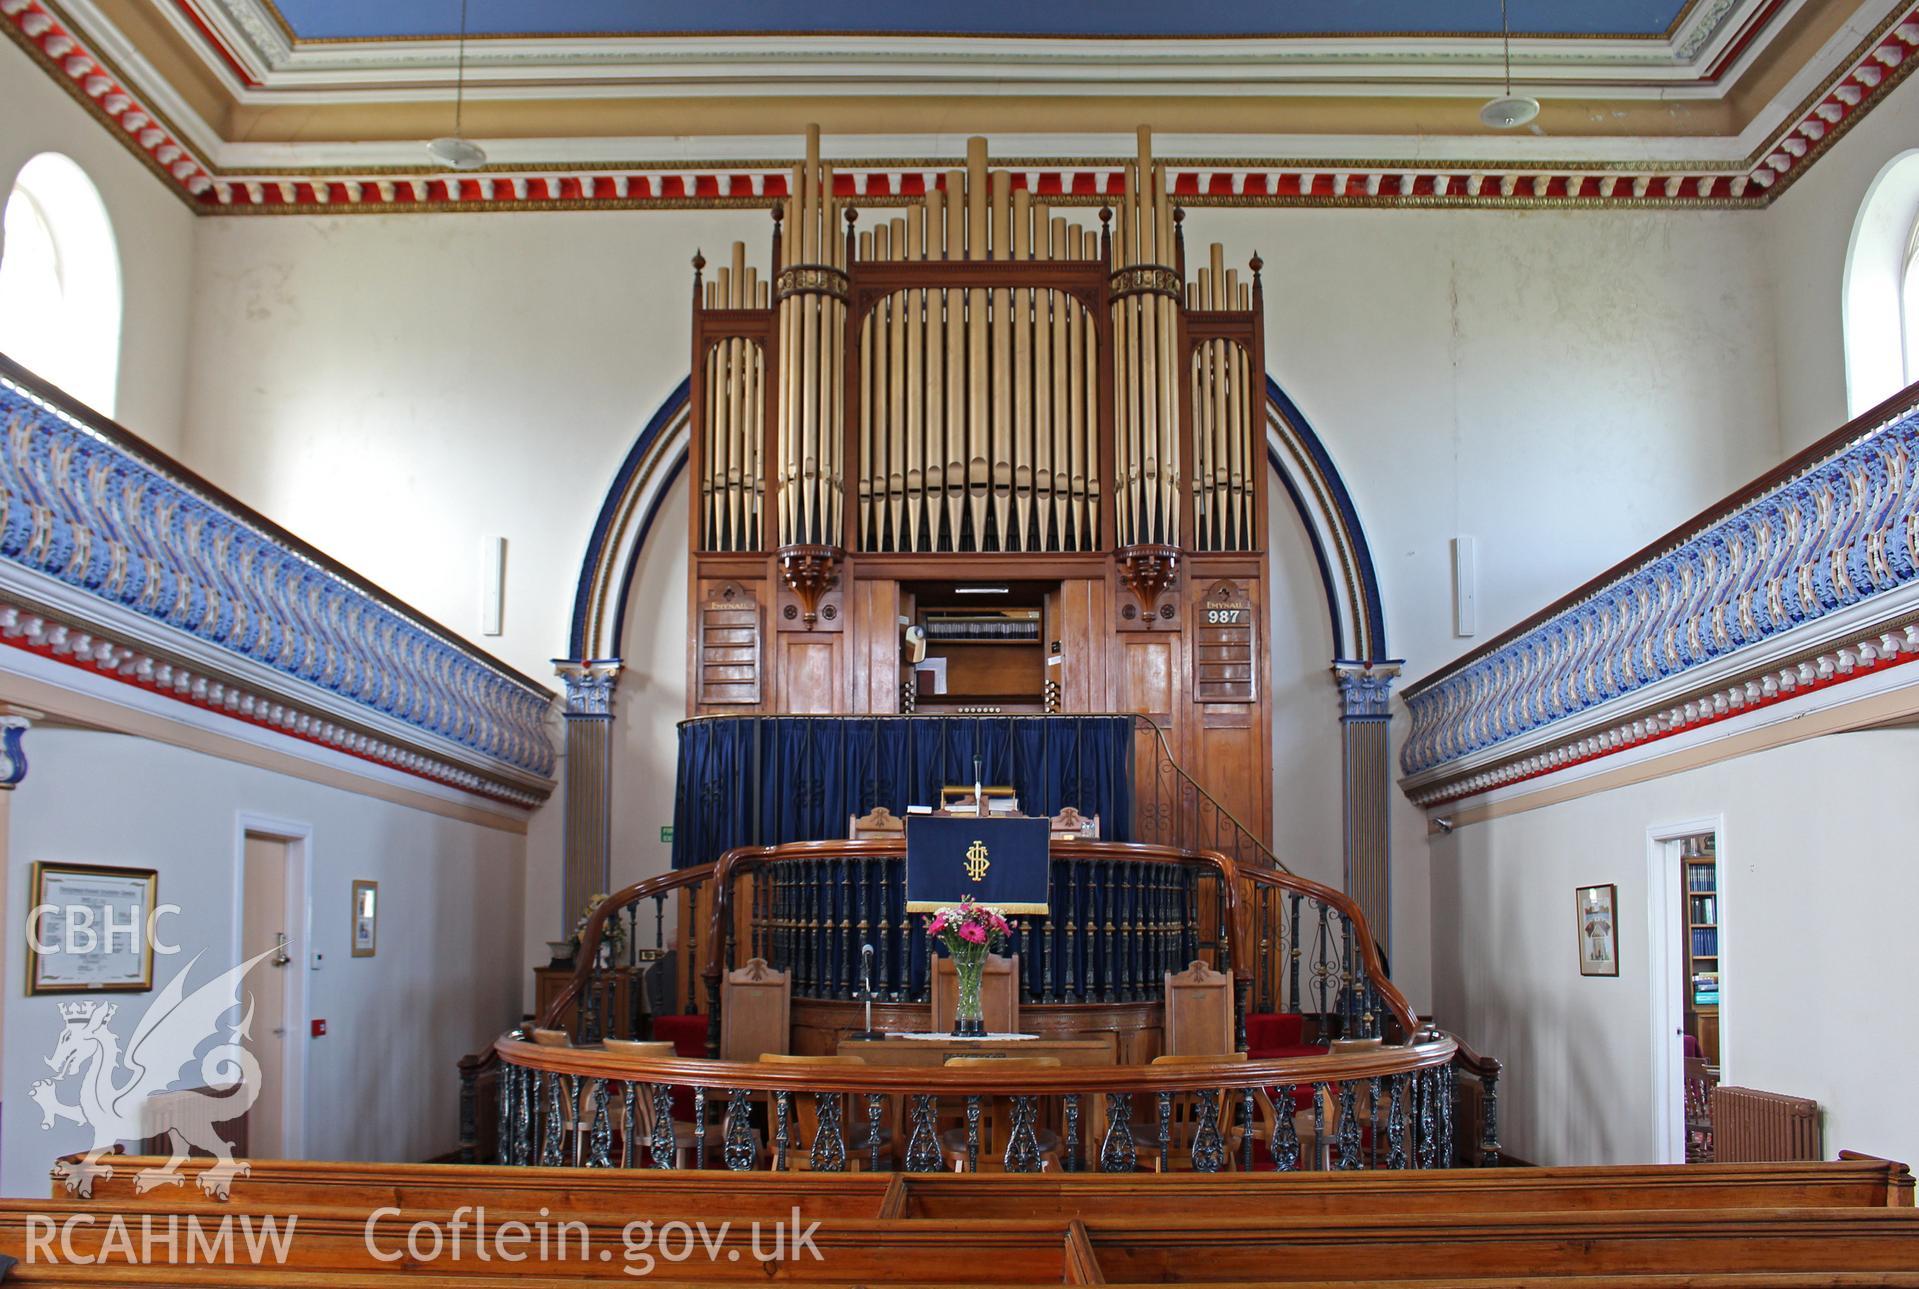 Interior view showing organ and pulpit. Photographic survey of Seion Welsh Baptist Chapel, Morriston, conducted by Sue Fielding on 13th May 2017.